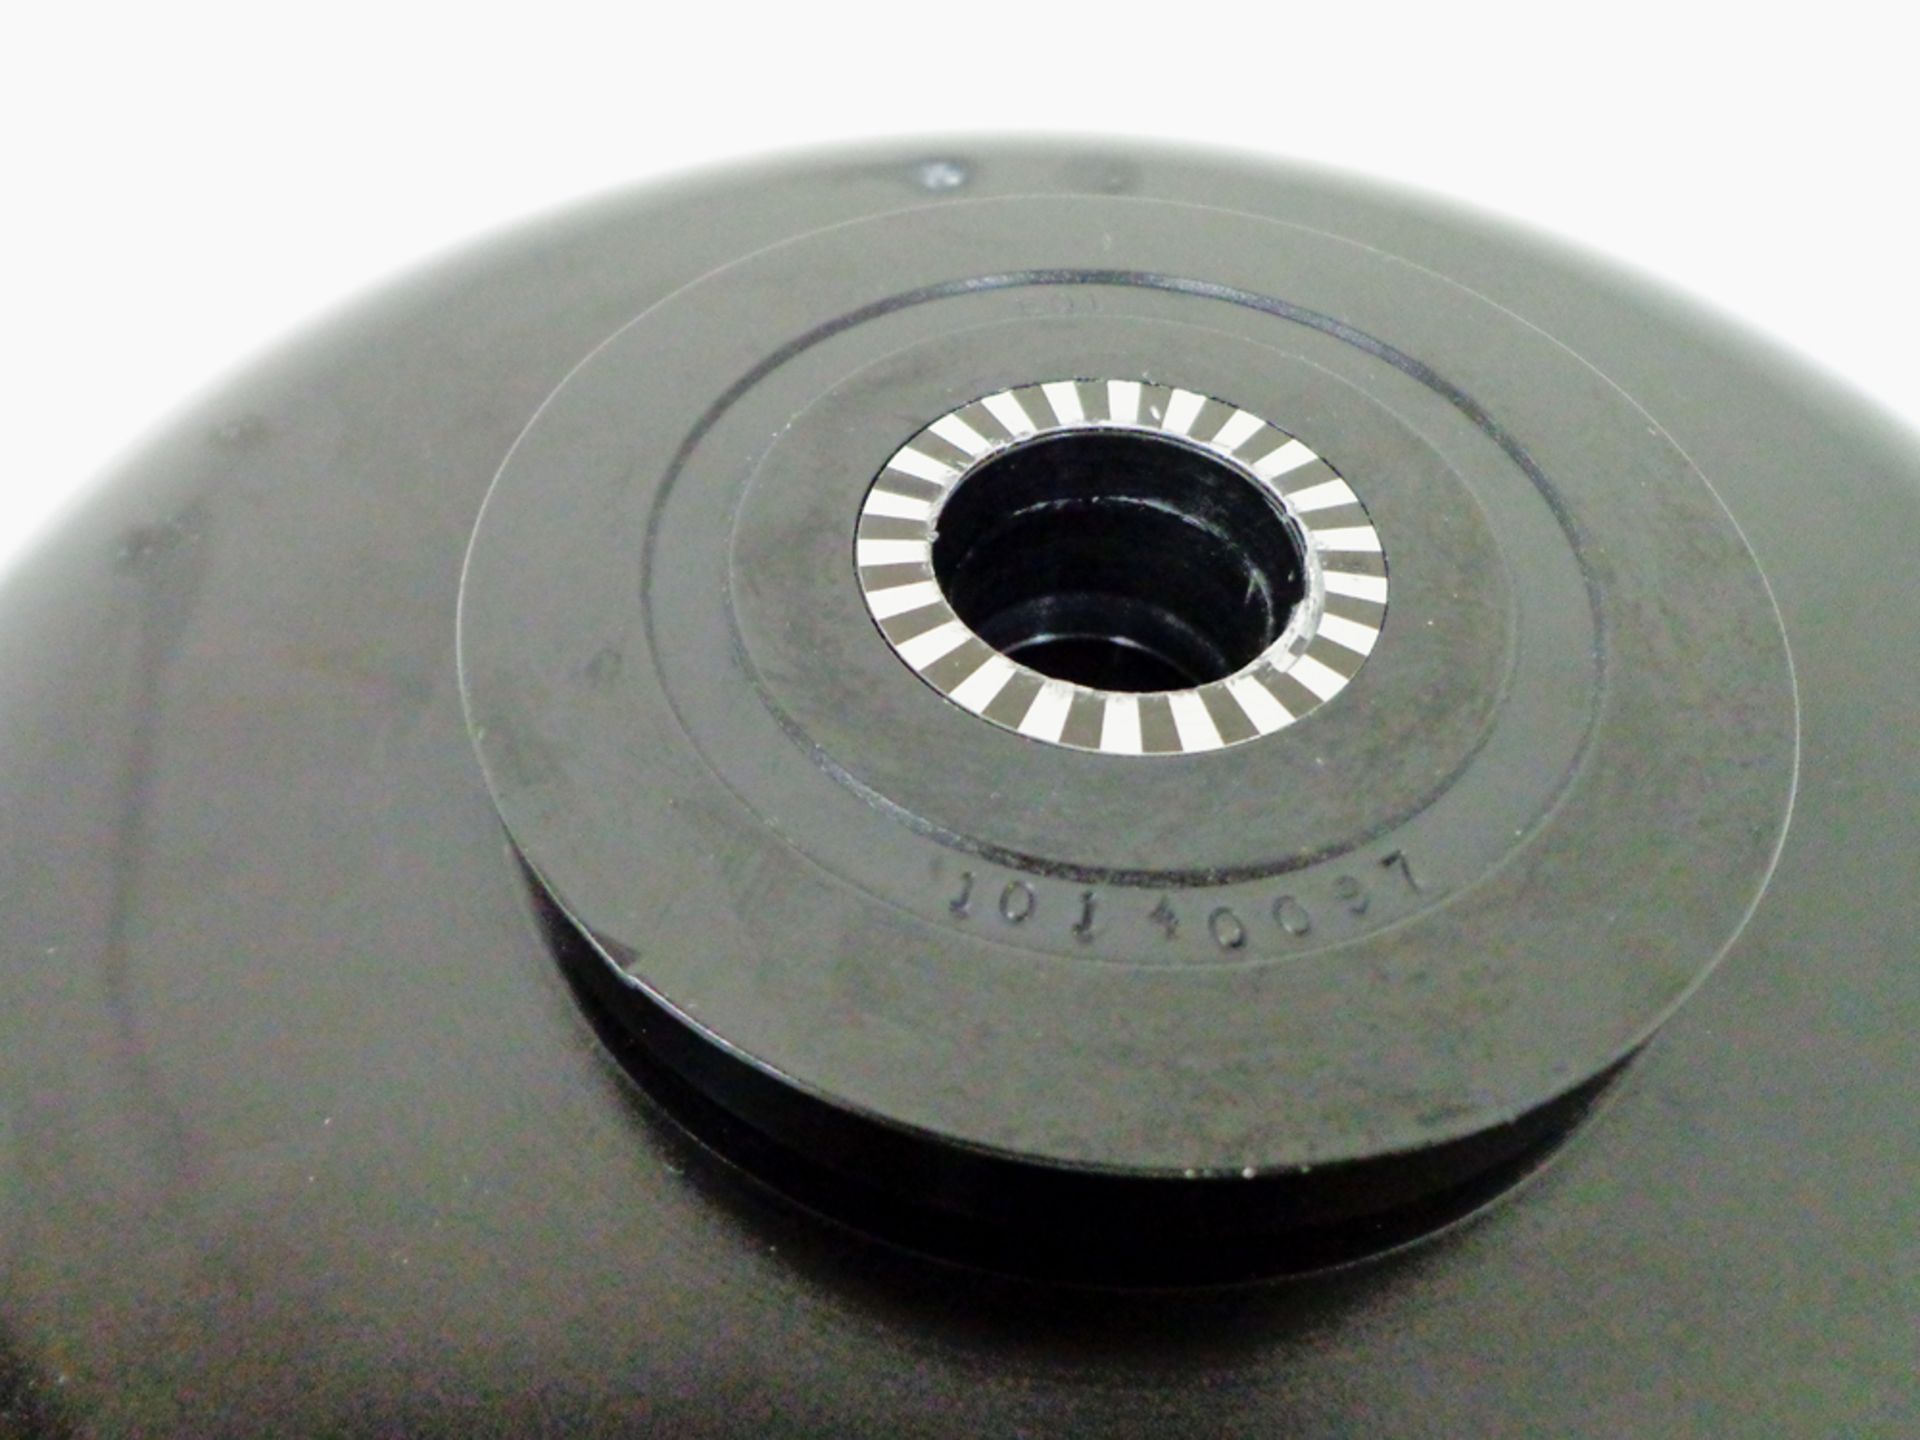 Sorvall A-641 Fixed Angle Rotor, serial number E01/10140097 (Ref: WA11721) - Image 5 of 5